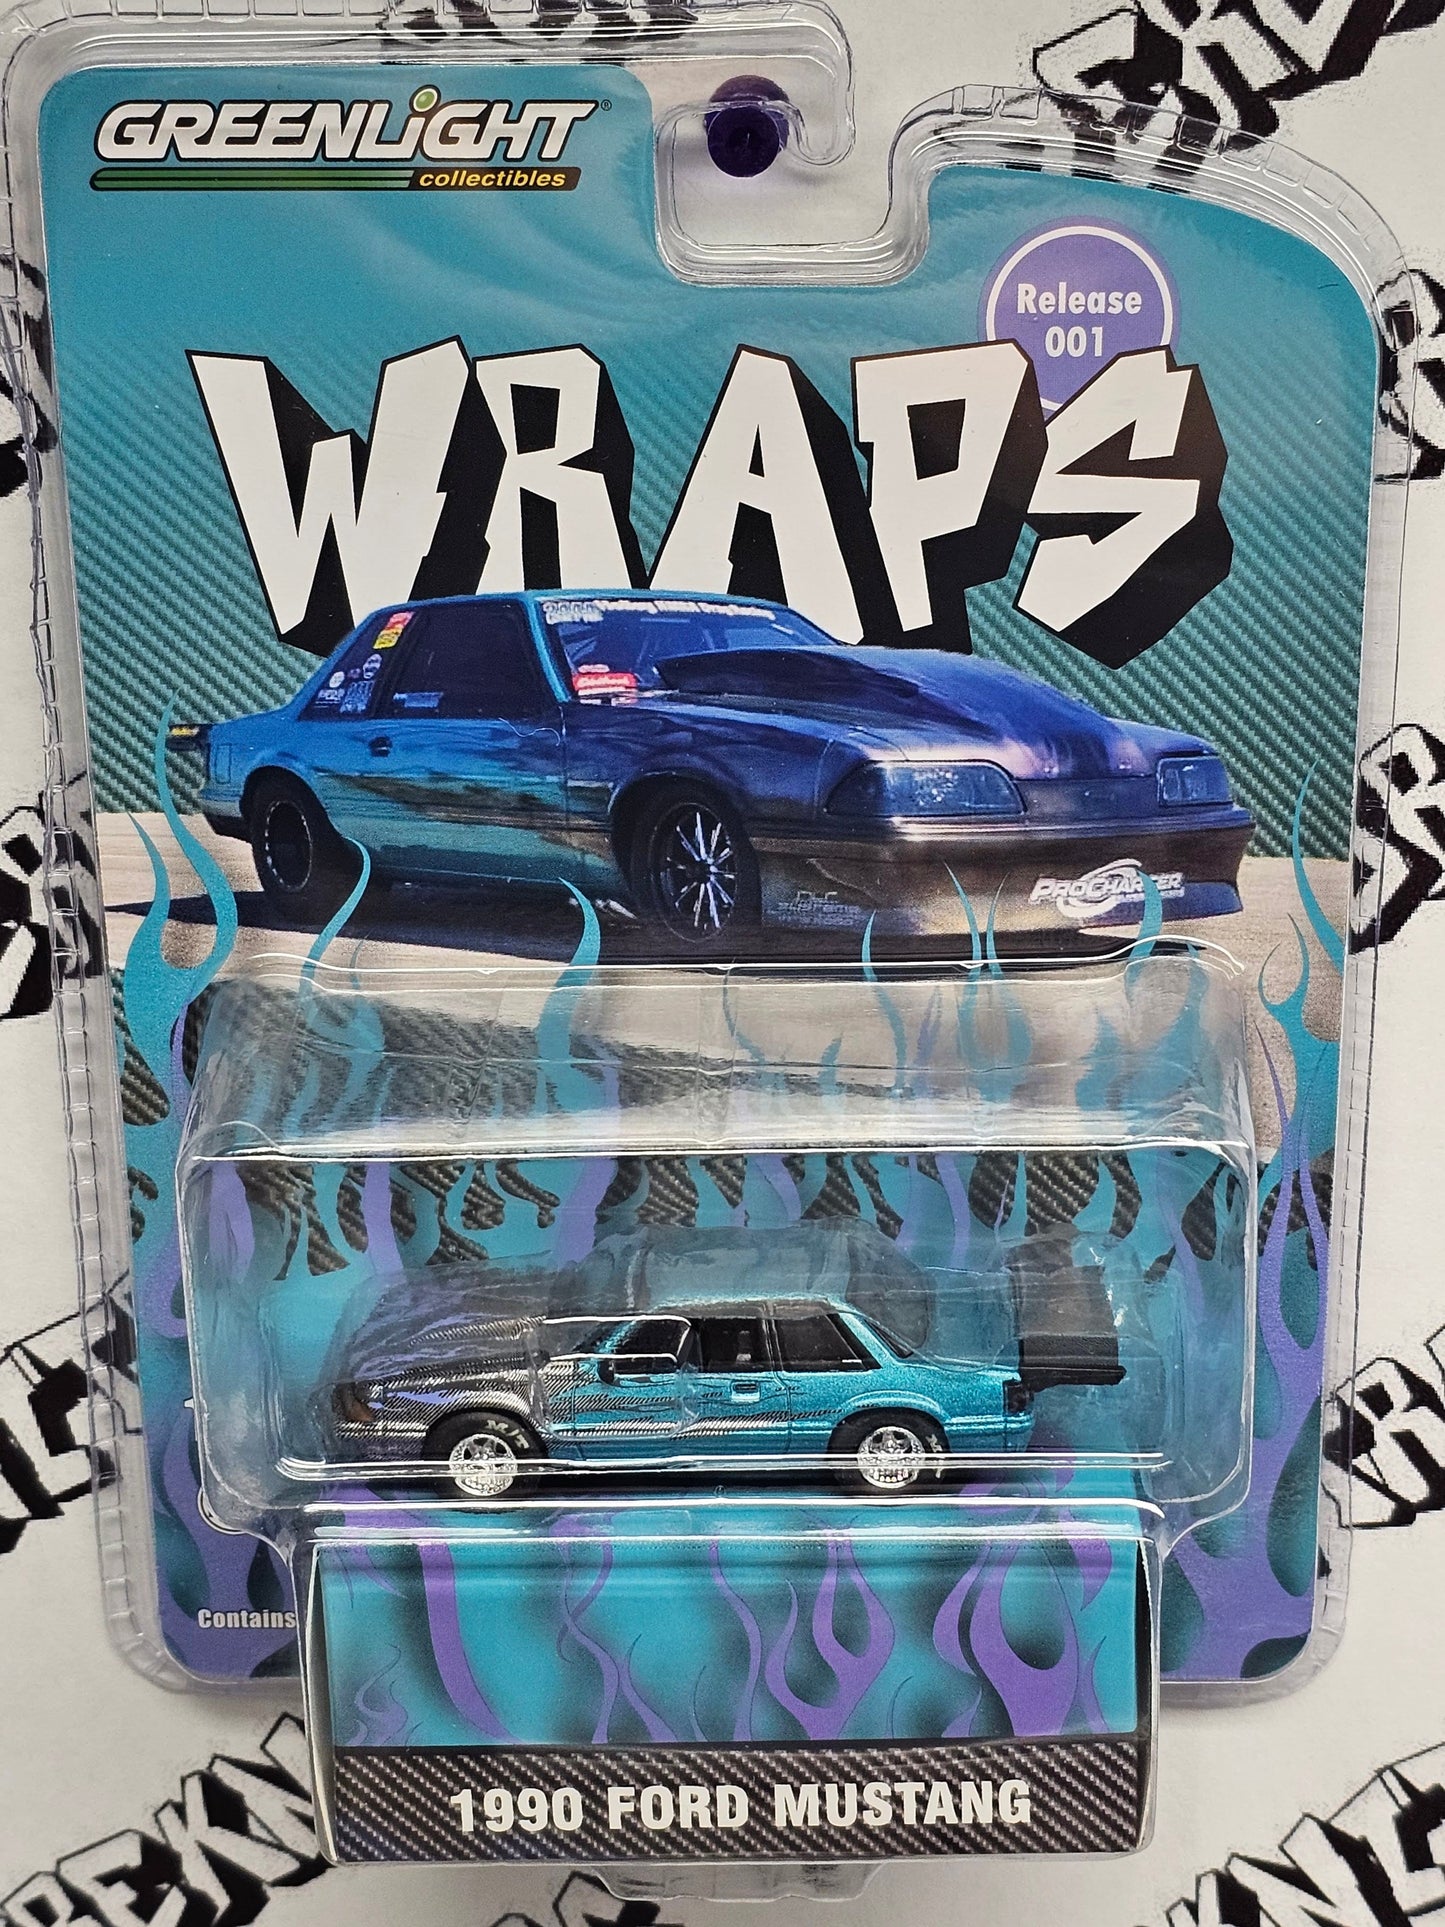 Damaged Package "Turbo AWD" Mustang GreenLight Collectibles WRAPS 1990 Ford Mustang Store Exclusive